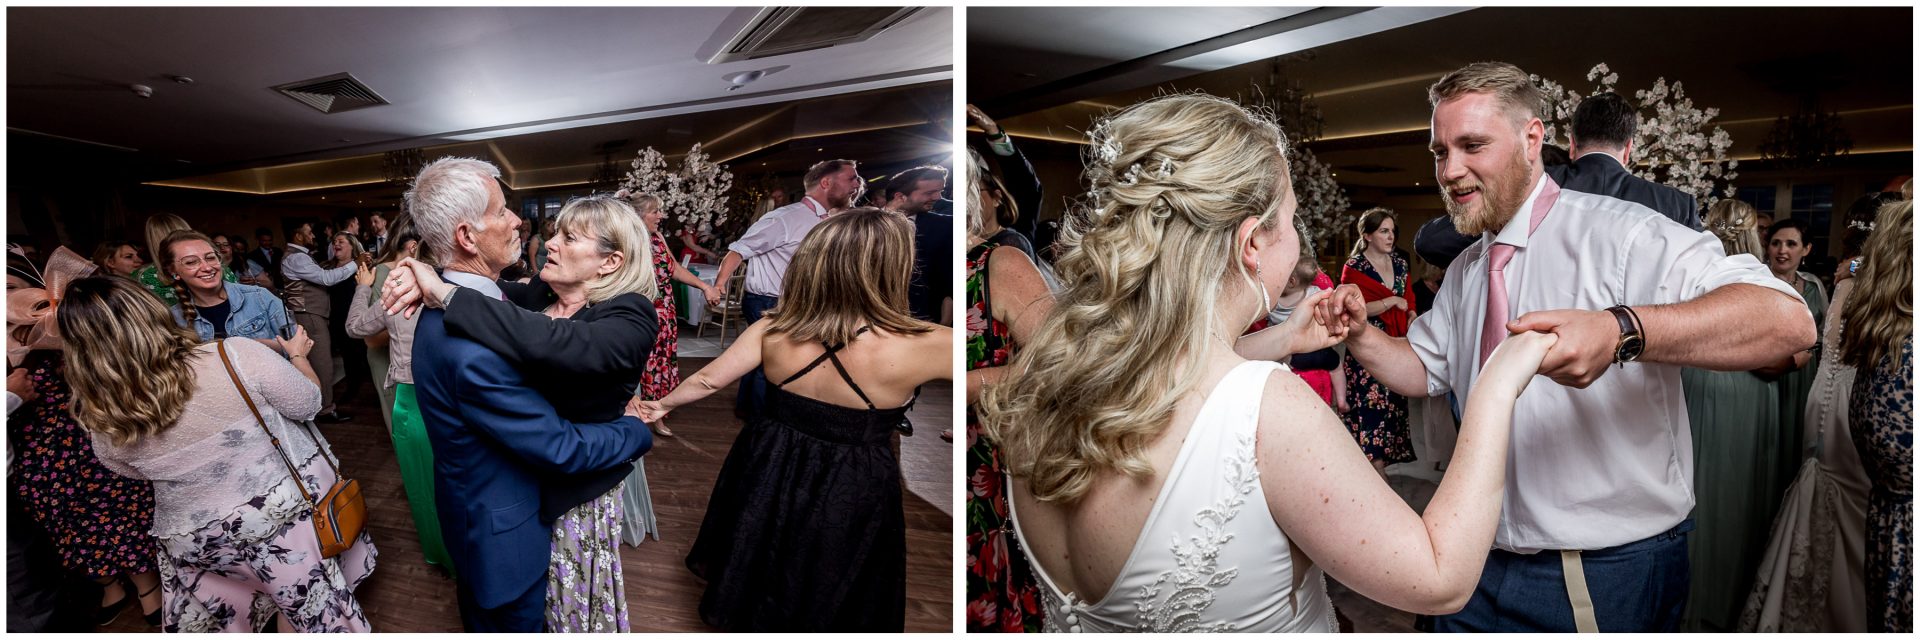 Wedding guests hit the dancefloor for the evening party